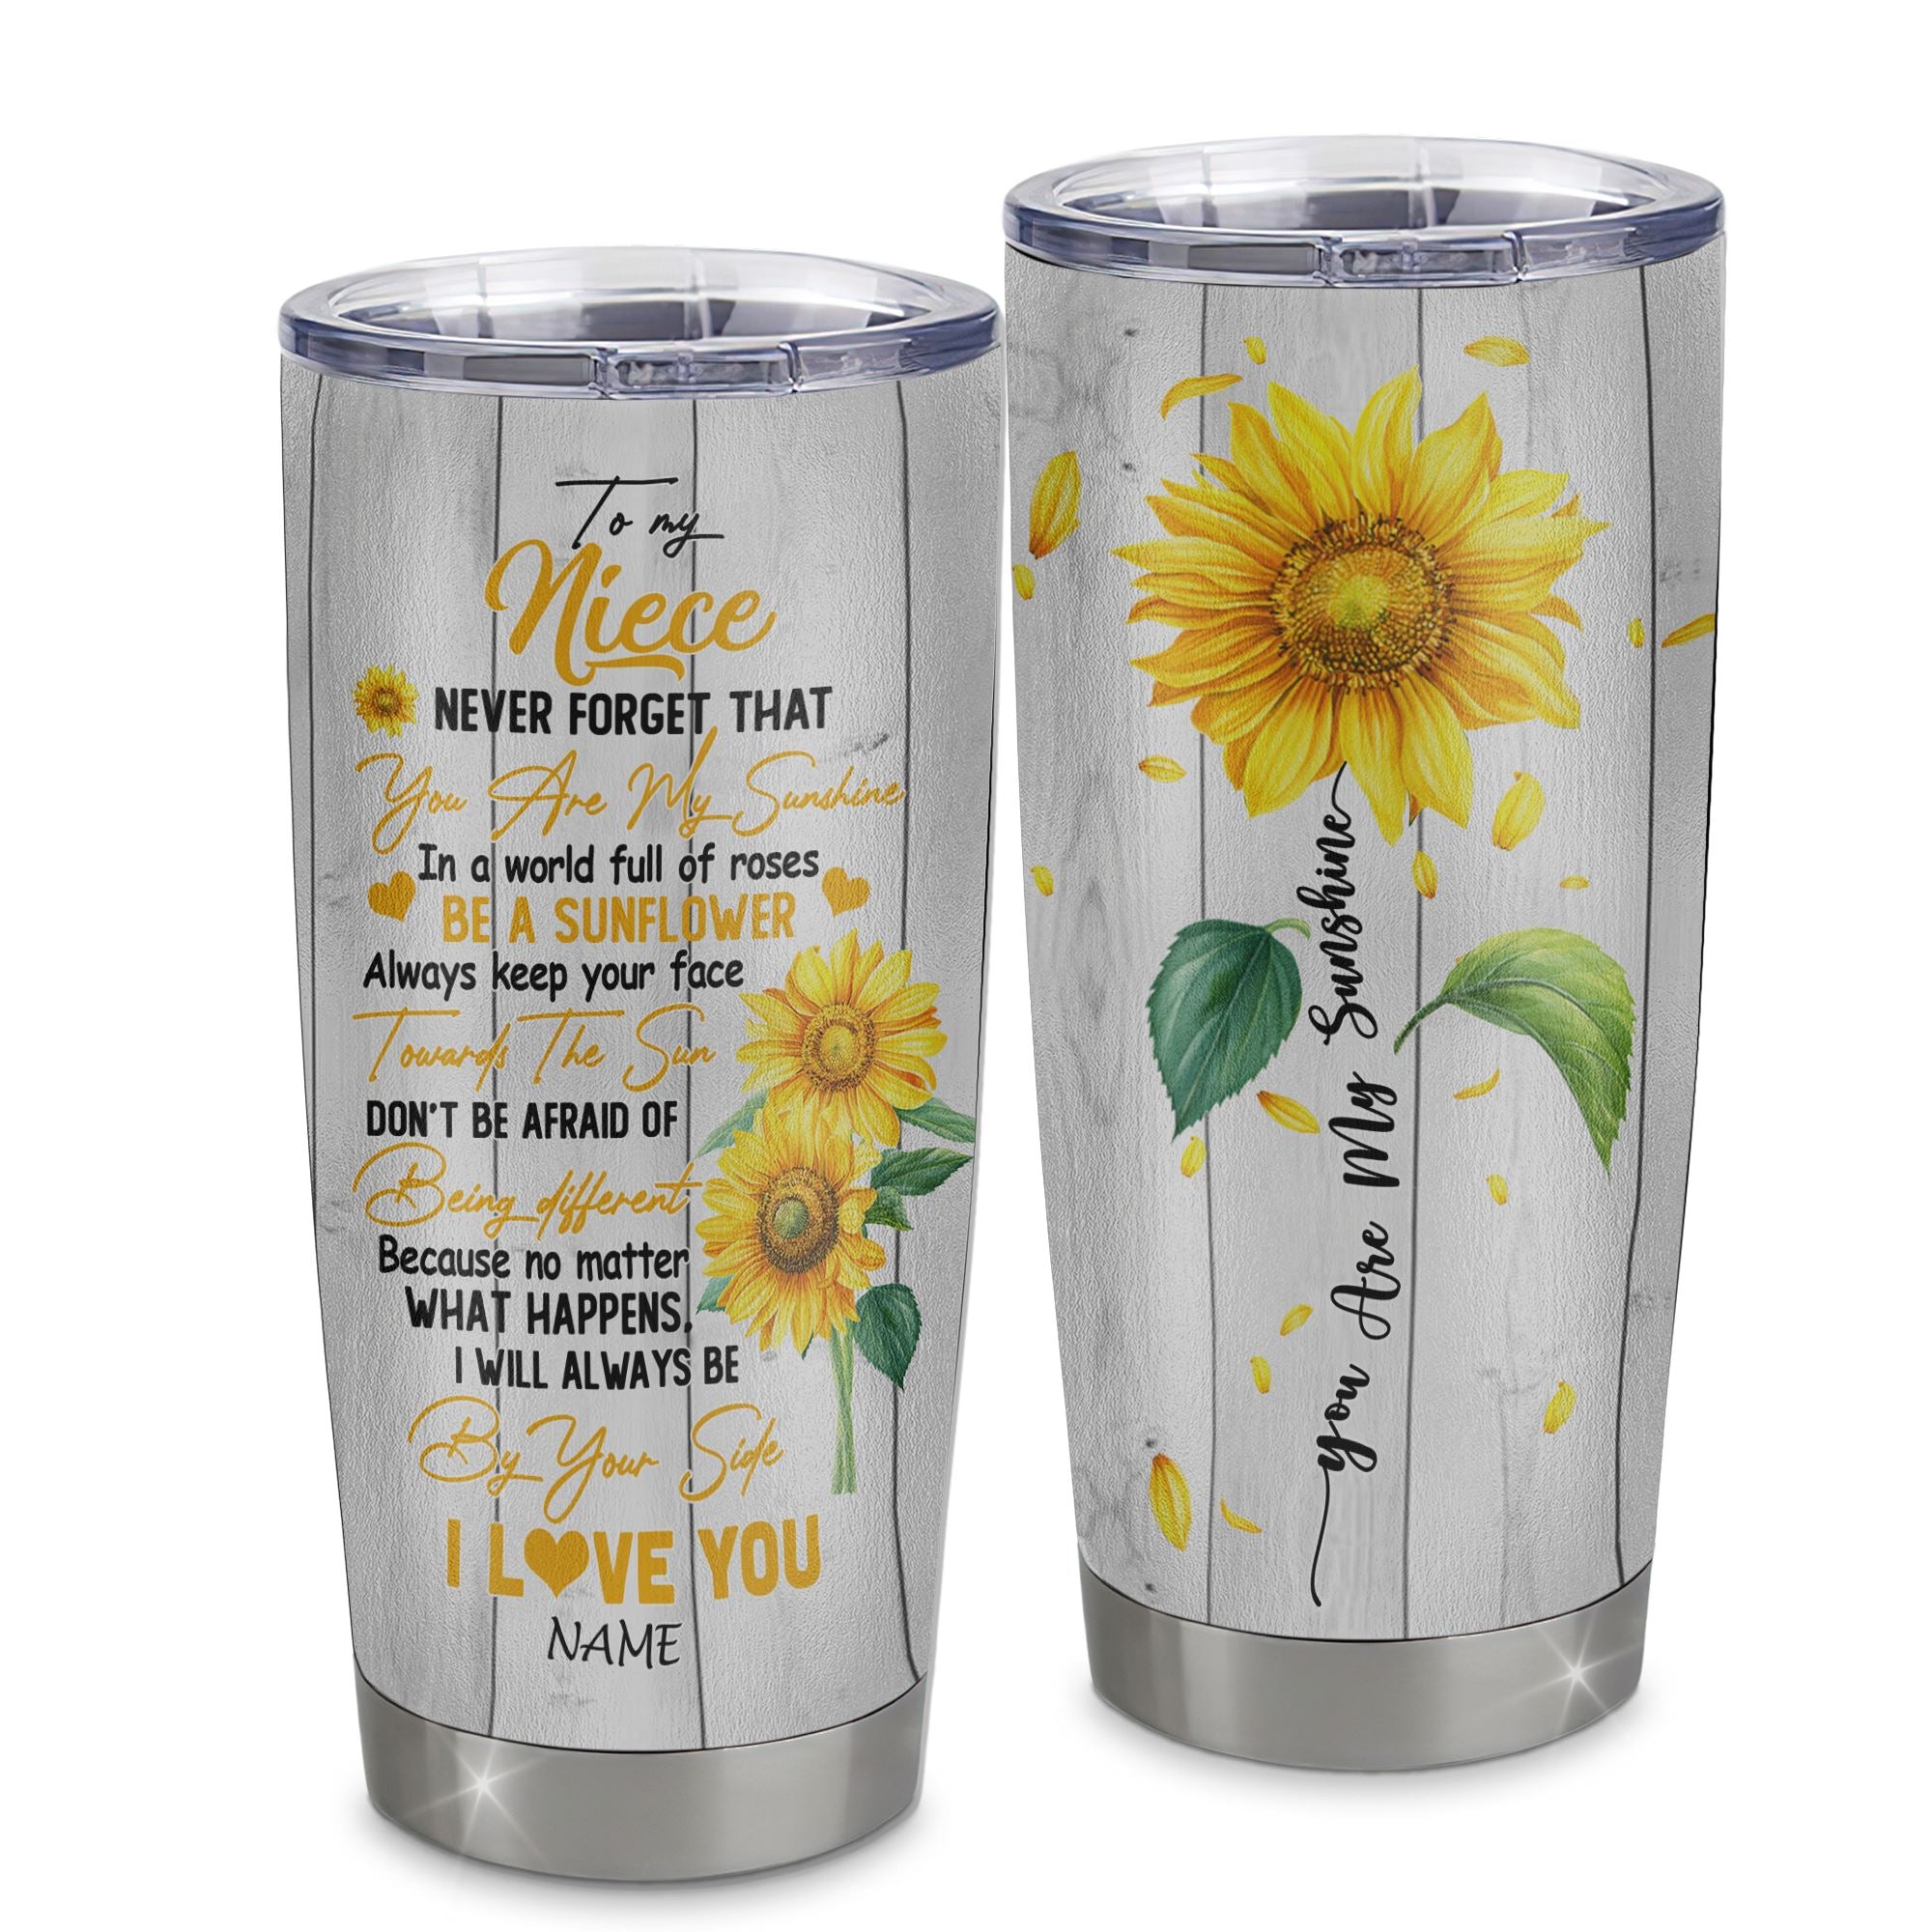 Personalized_To_My_Niece_From_Aunt_Uncle_Stainless_Steel_Tumbler_Cup_Never_Forget_You_Are_My_Sunshine_Sunflower_Niece_Birthday_Graduation_Christmas_Travel_Mug_Tumbler_mockup_1.jpg